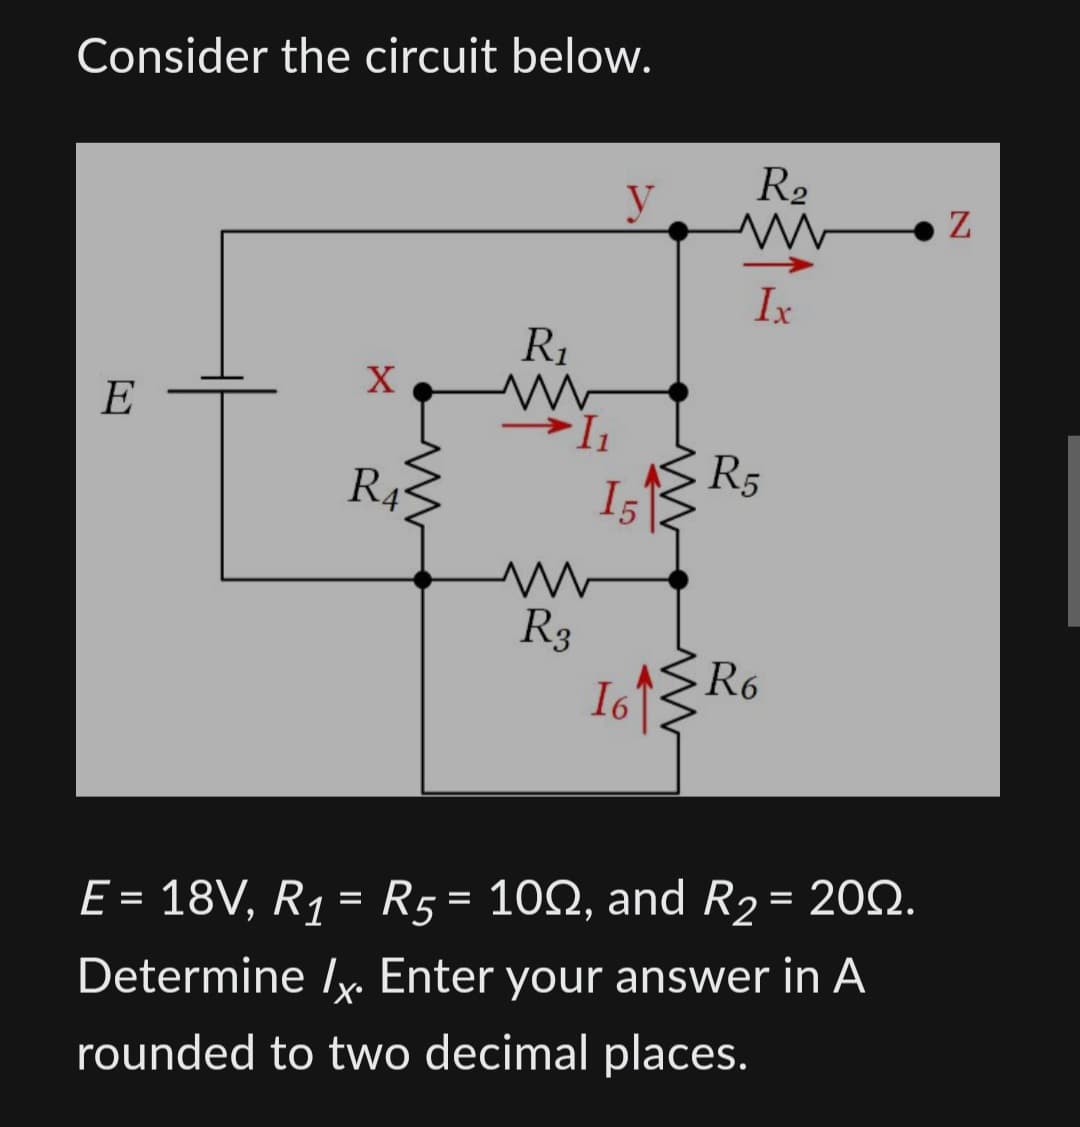 Consider the circuit below.
E
X
www
R4
R₁
I₁
R3
y
15
www
R₂
1
Ix
R5
R6
16 15 Ro
E = 18V, R₁ = R5 = 100, and R₂ = 200.
Determine /. Enter your answer in A
rounded to two decimal places.
N